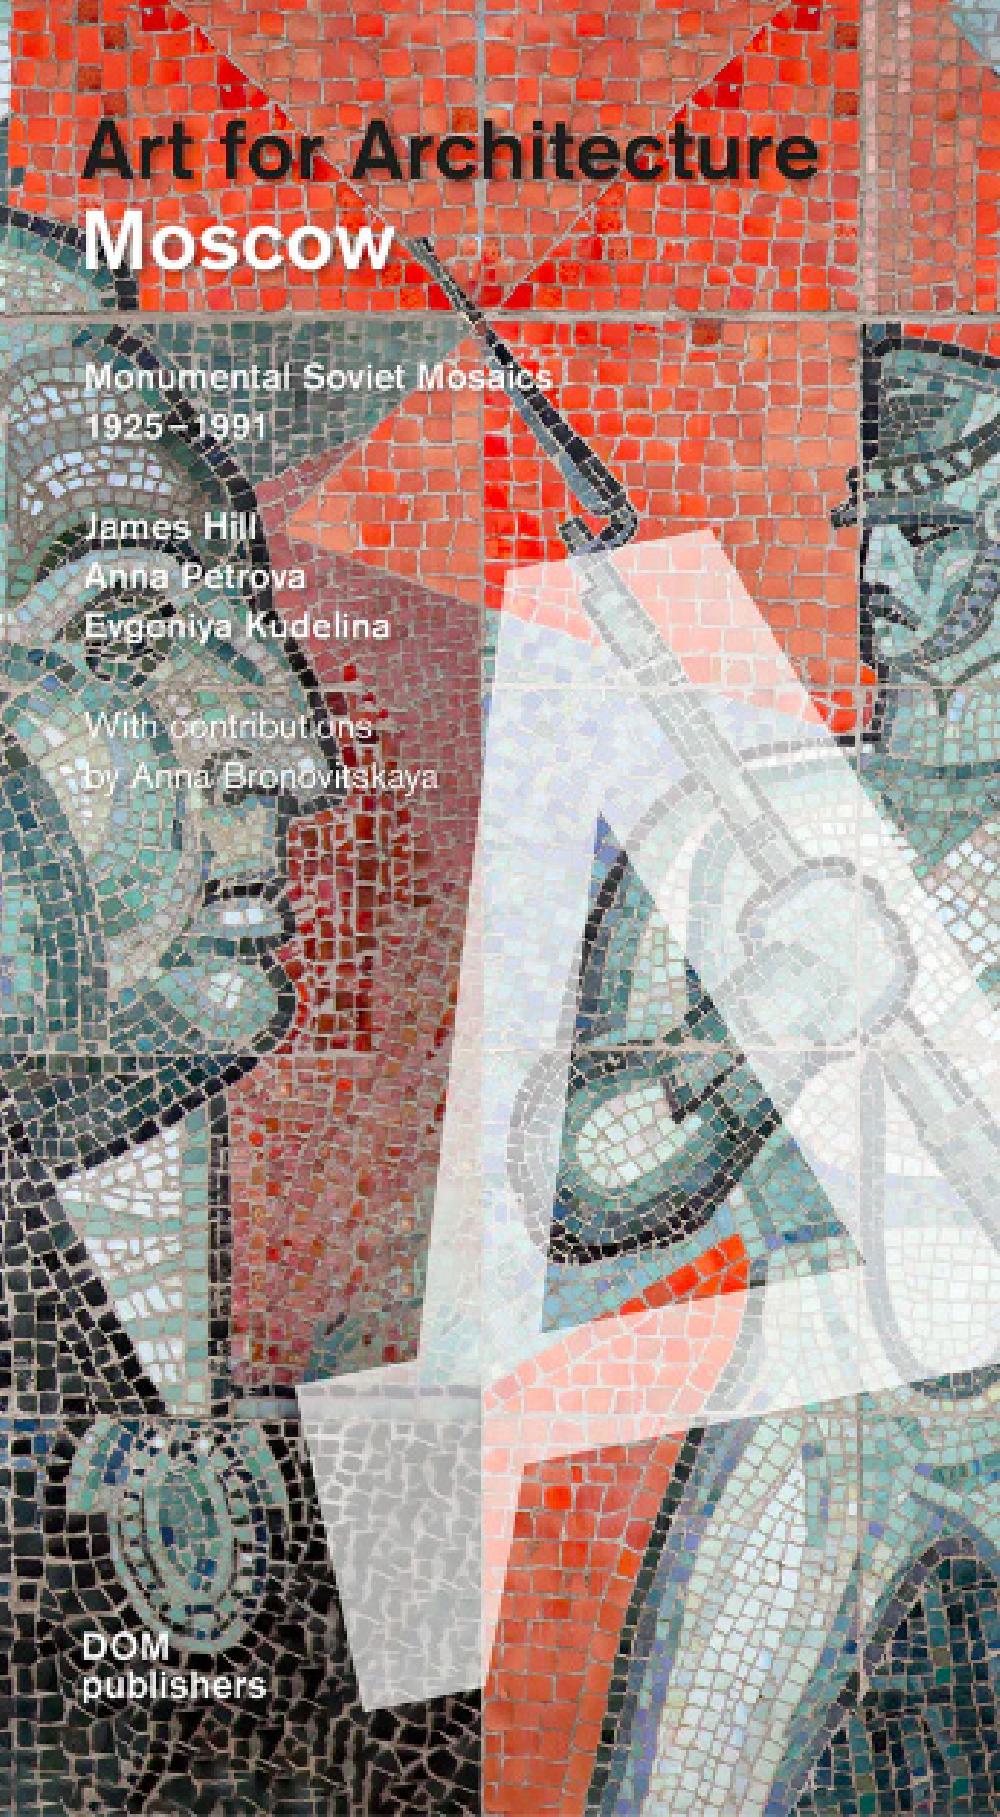 MOSCOW - ART FOR ARCHITECTURE - Monumental Soviet Mosaics